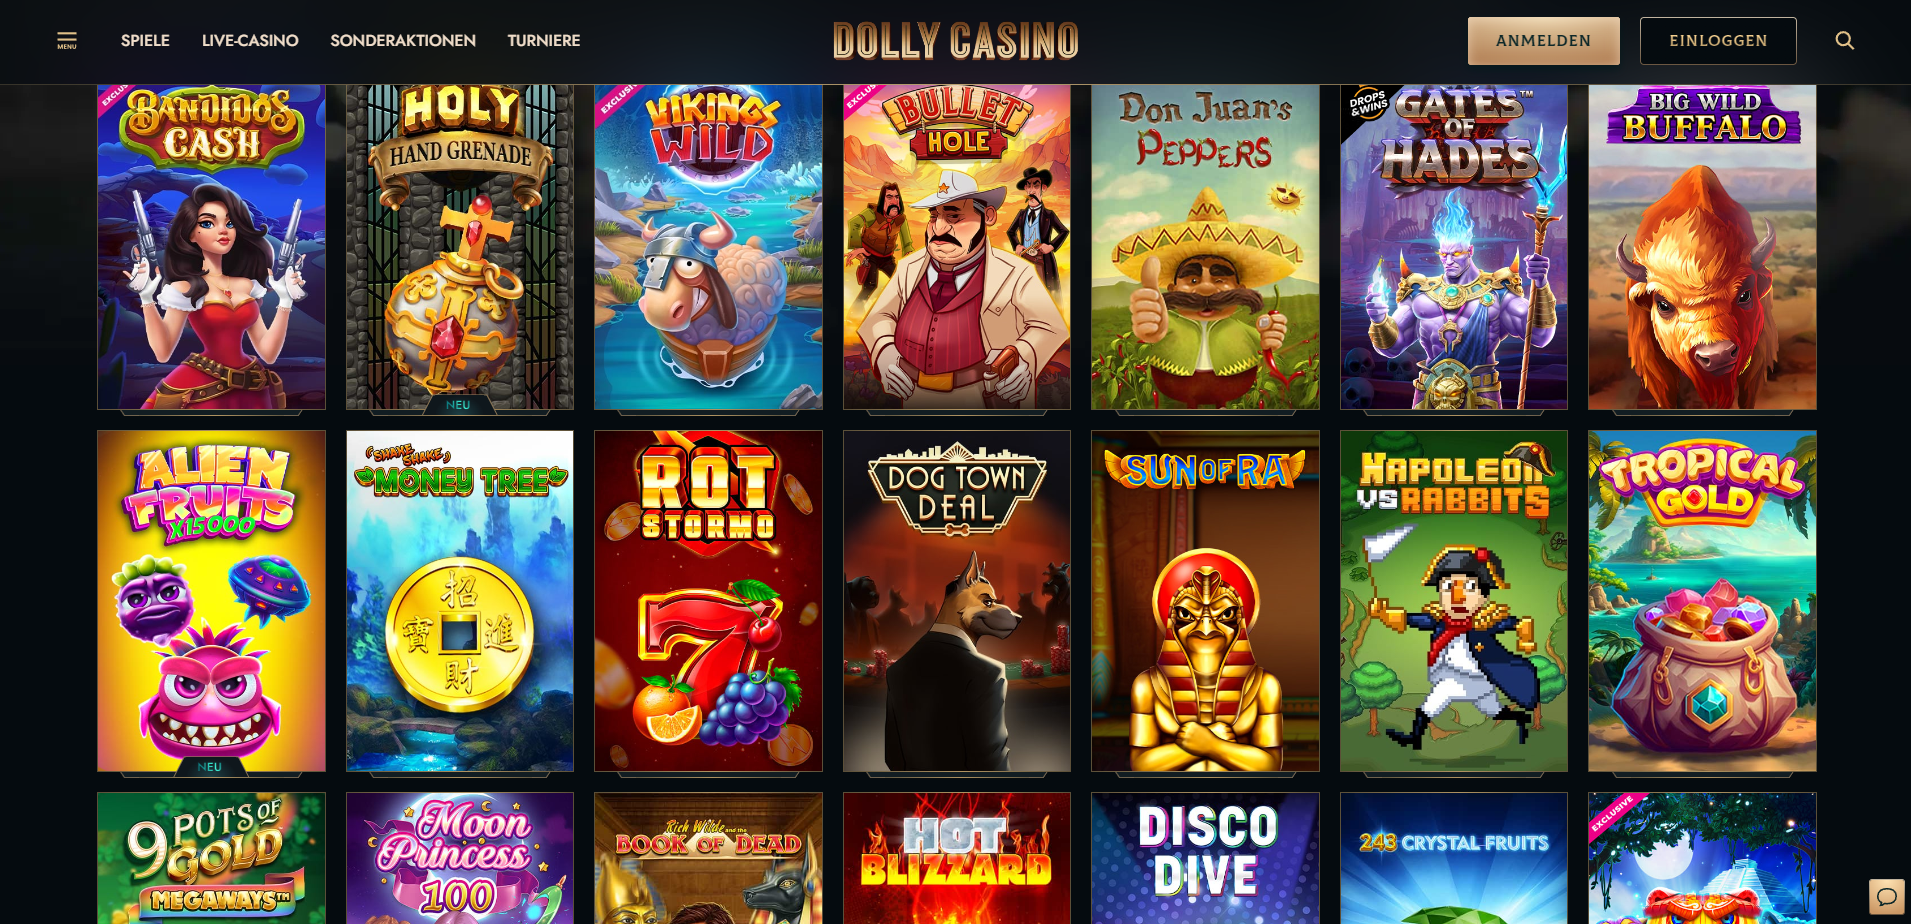 Dolly Casino Spielauswahl